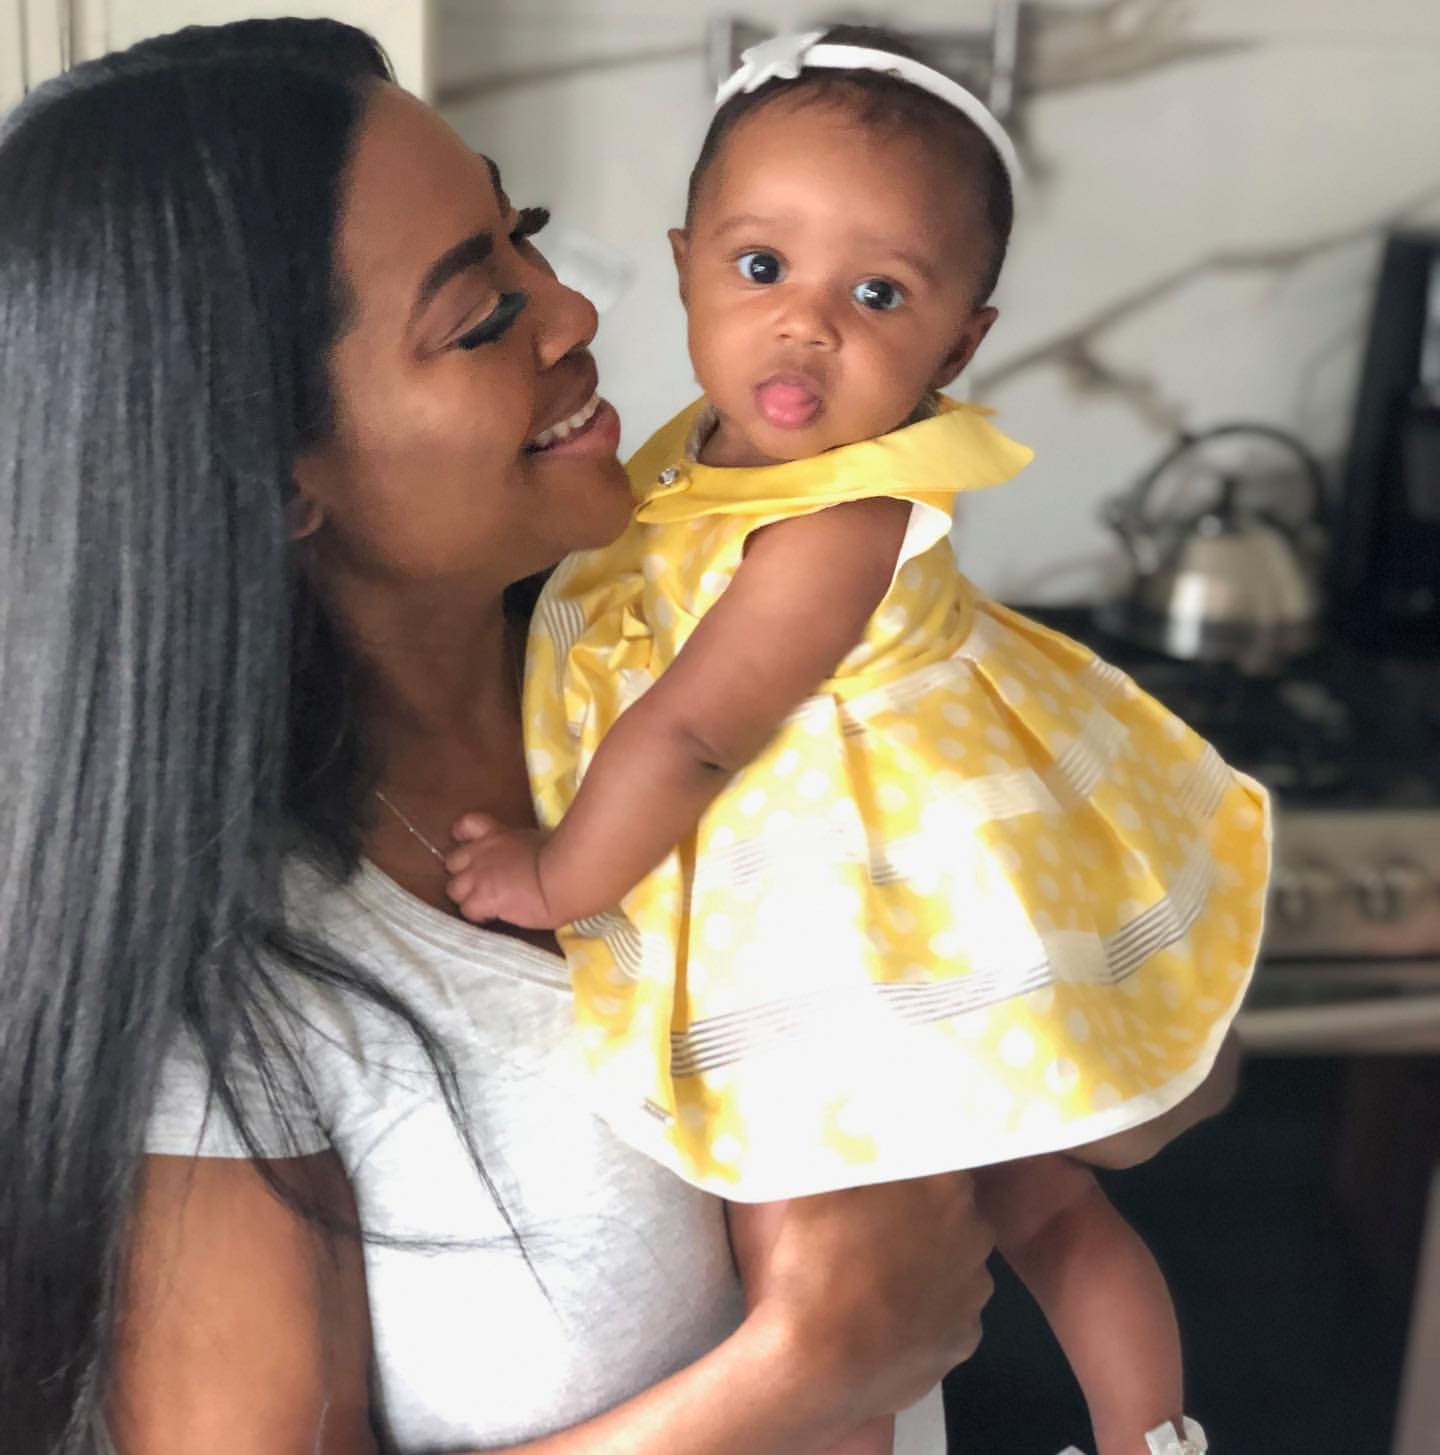 Kenya Moore's Baby Girl, Brooklyn Daly Is A Gorgeous Princess In A Pink Dress - Check Out The Dreamy Photos Here